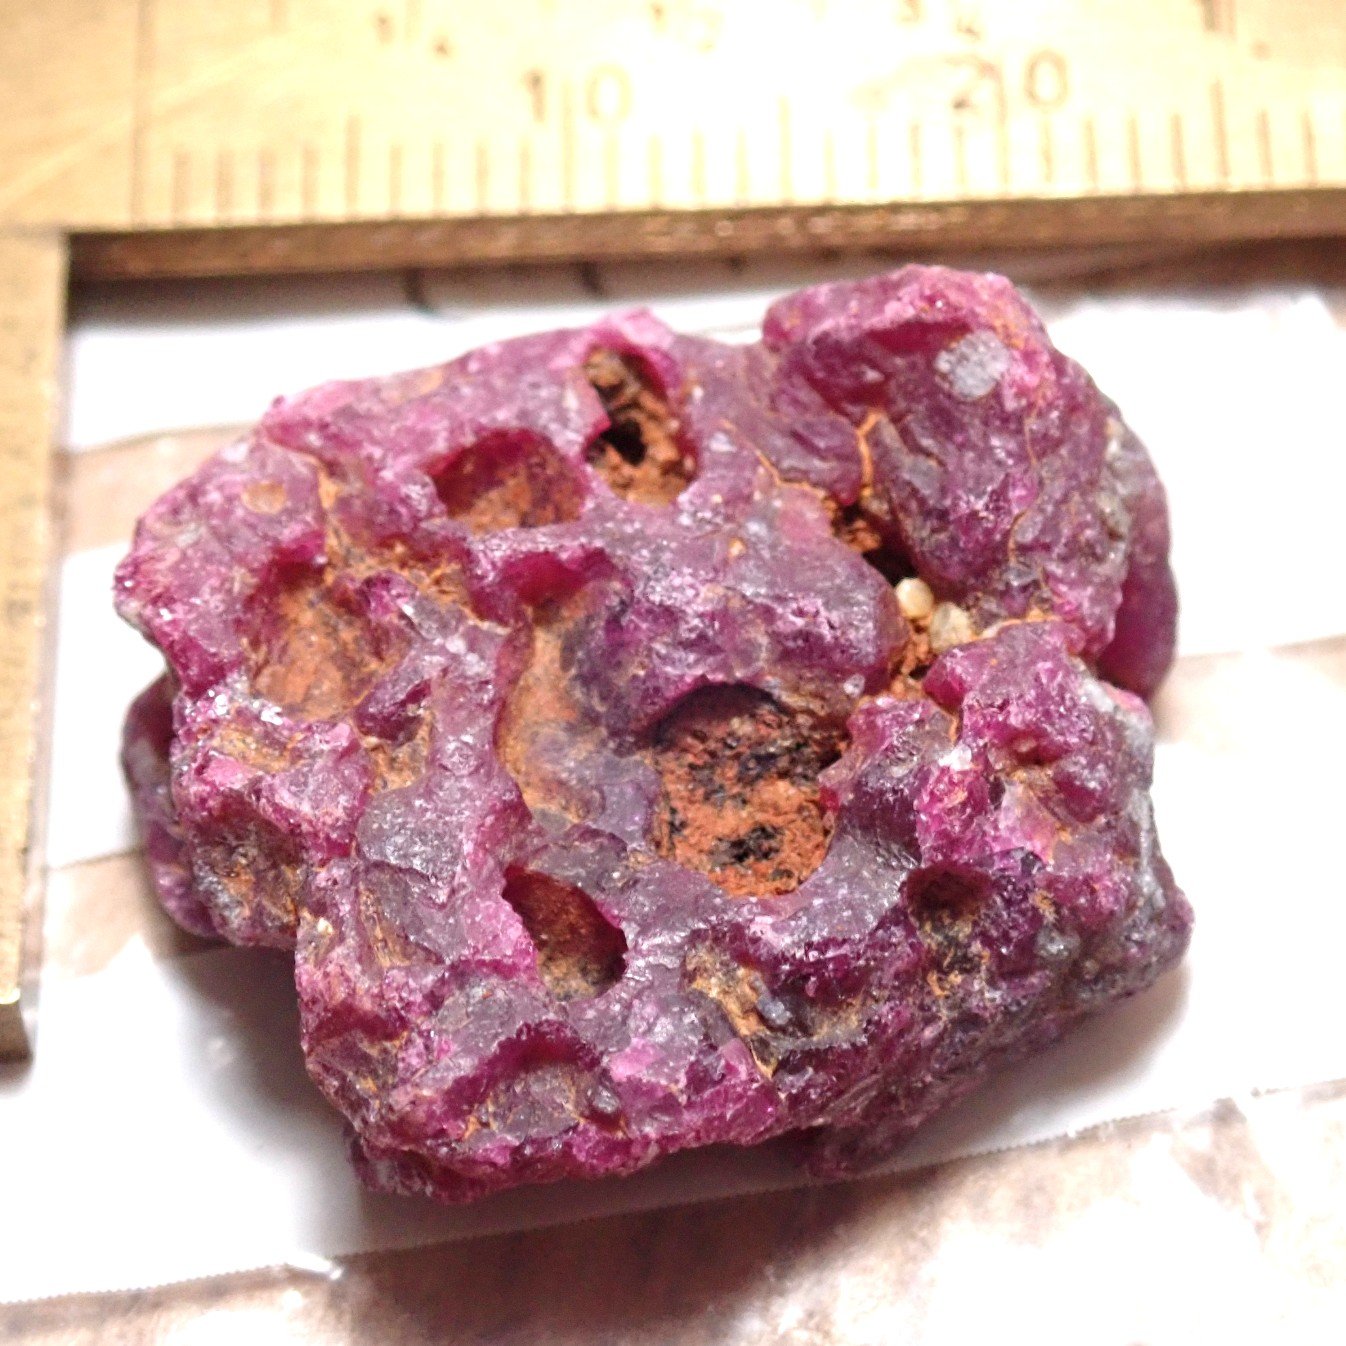 29.80ct Ruby Crystal, Tanzania, Untreated Unheated-Gems Of East Africa